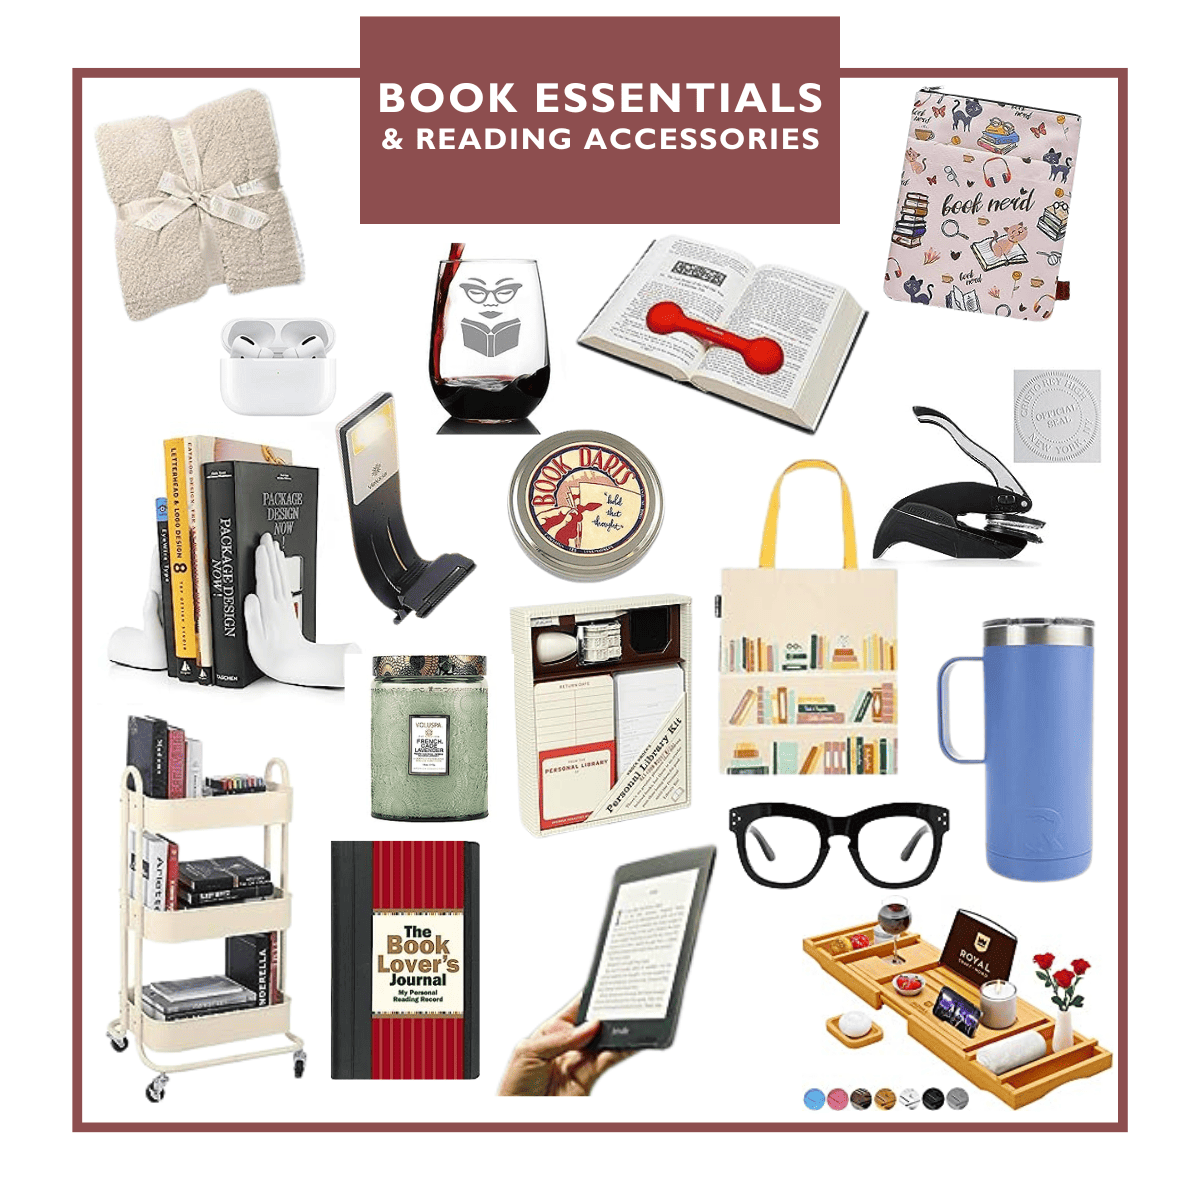 20 Best Book Essentials & Reading Accessories You Need